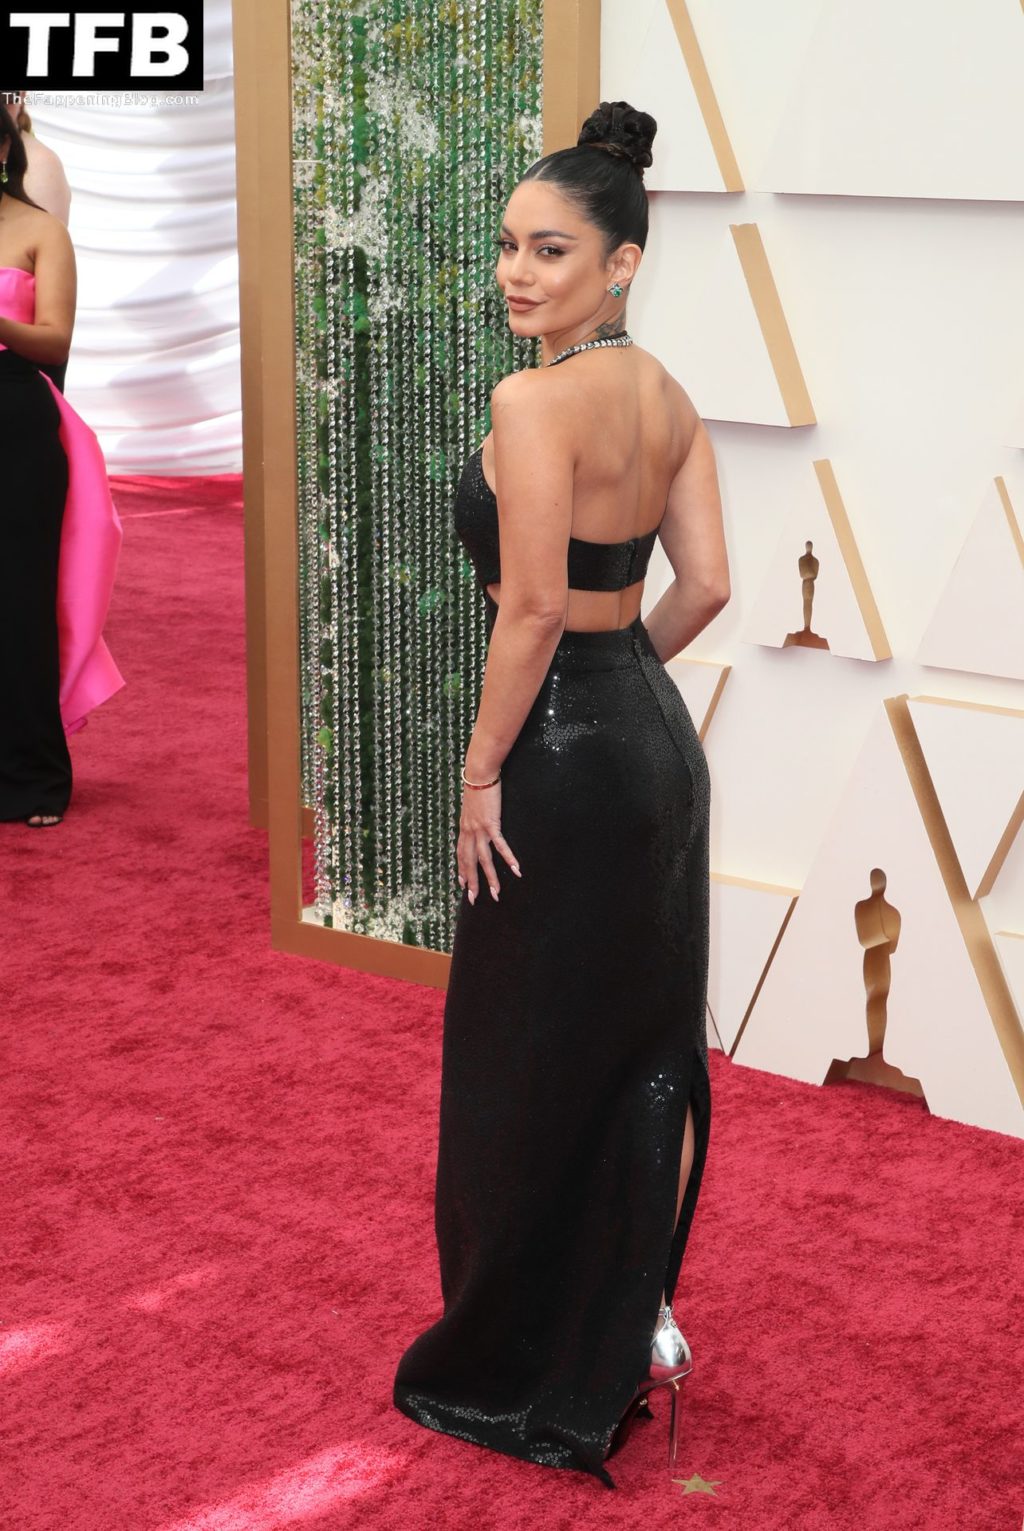 Vanessa Hudgens Sexy The Fappening Blog 47 3 1024x1531 - Vanessa Hudgens Poses on the Red Carpet at the 94th Annual Academy Awards (83 Photos)